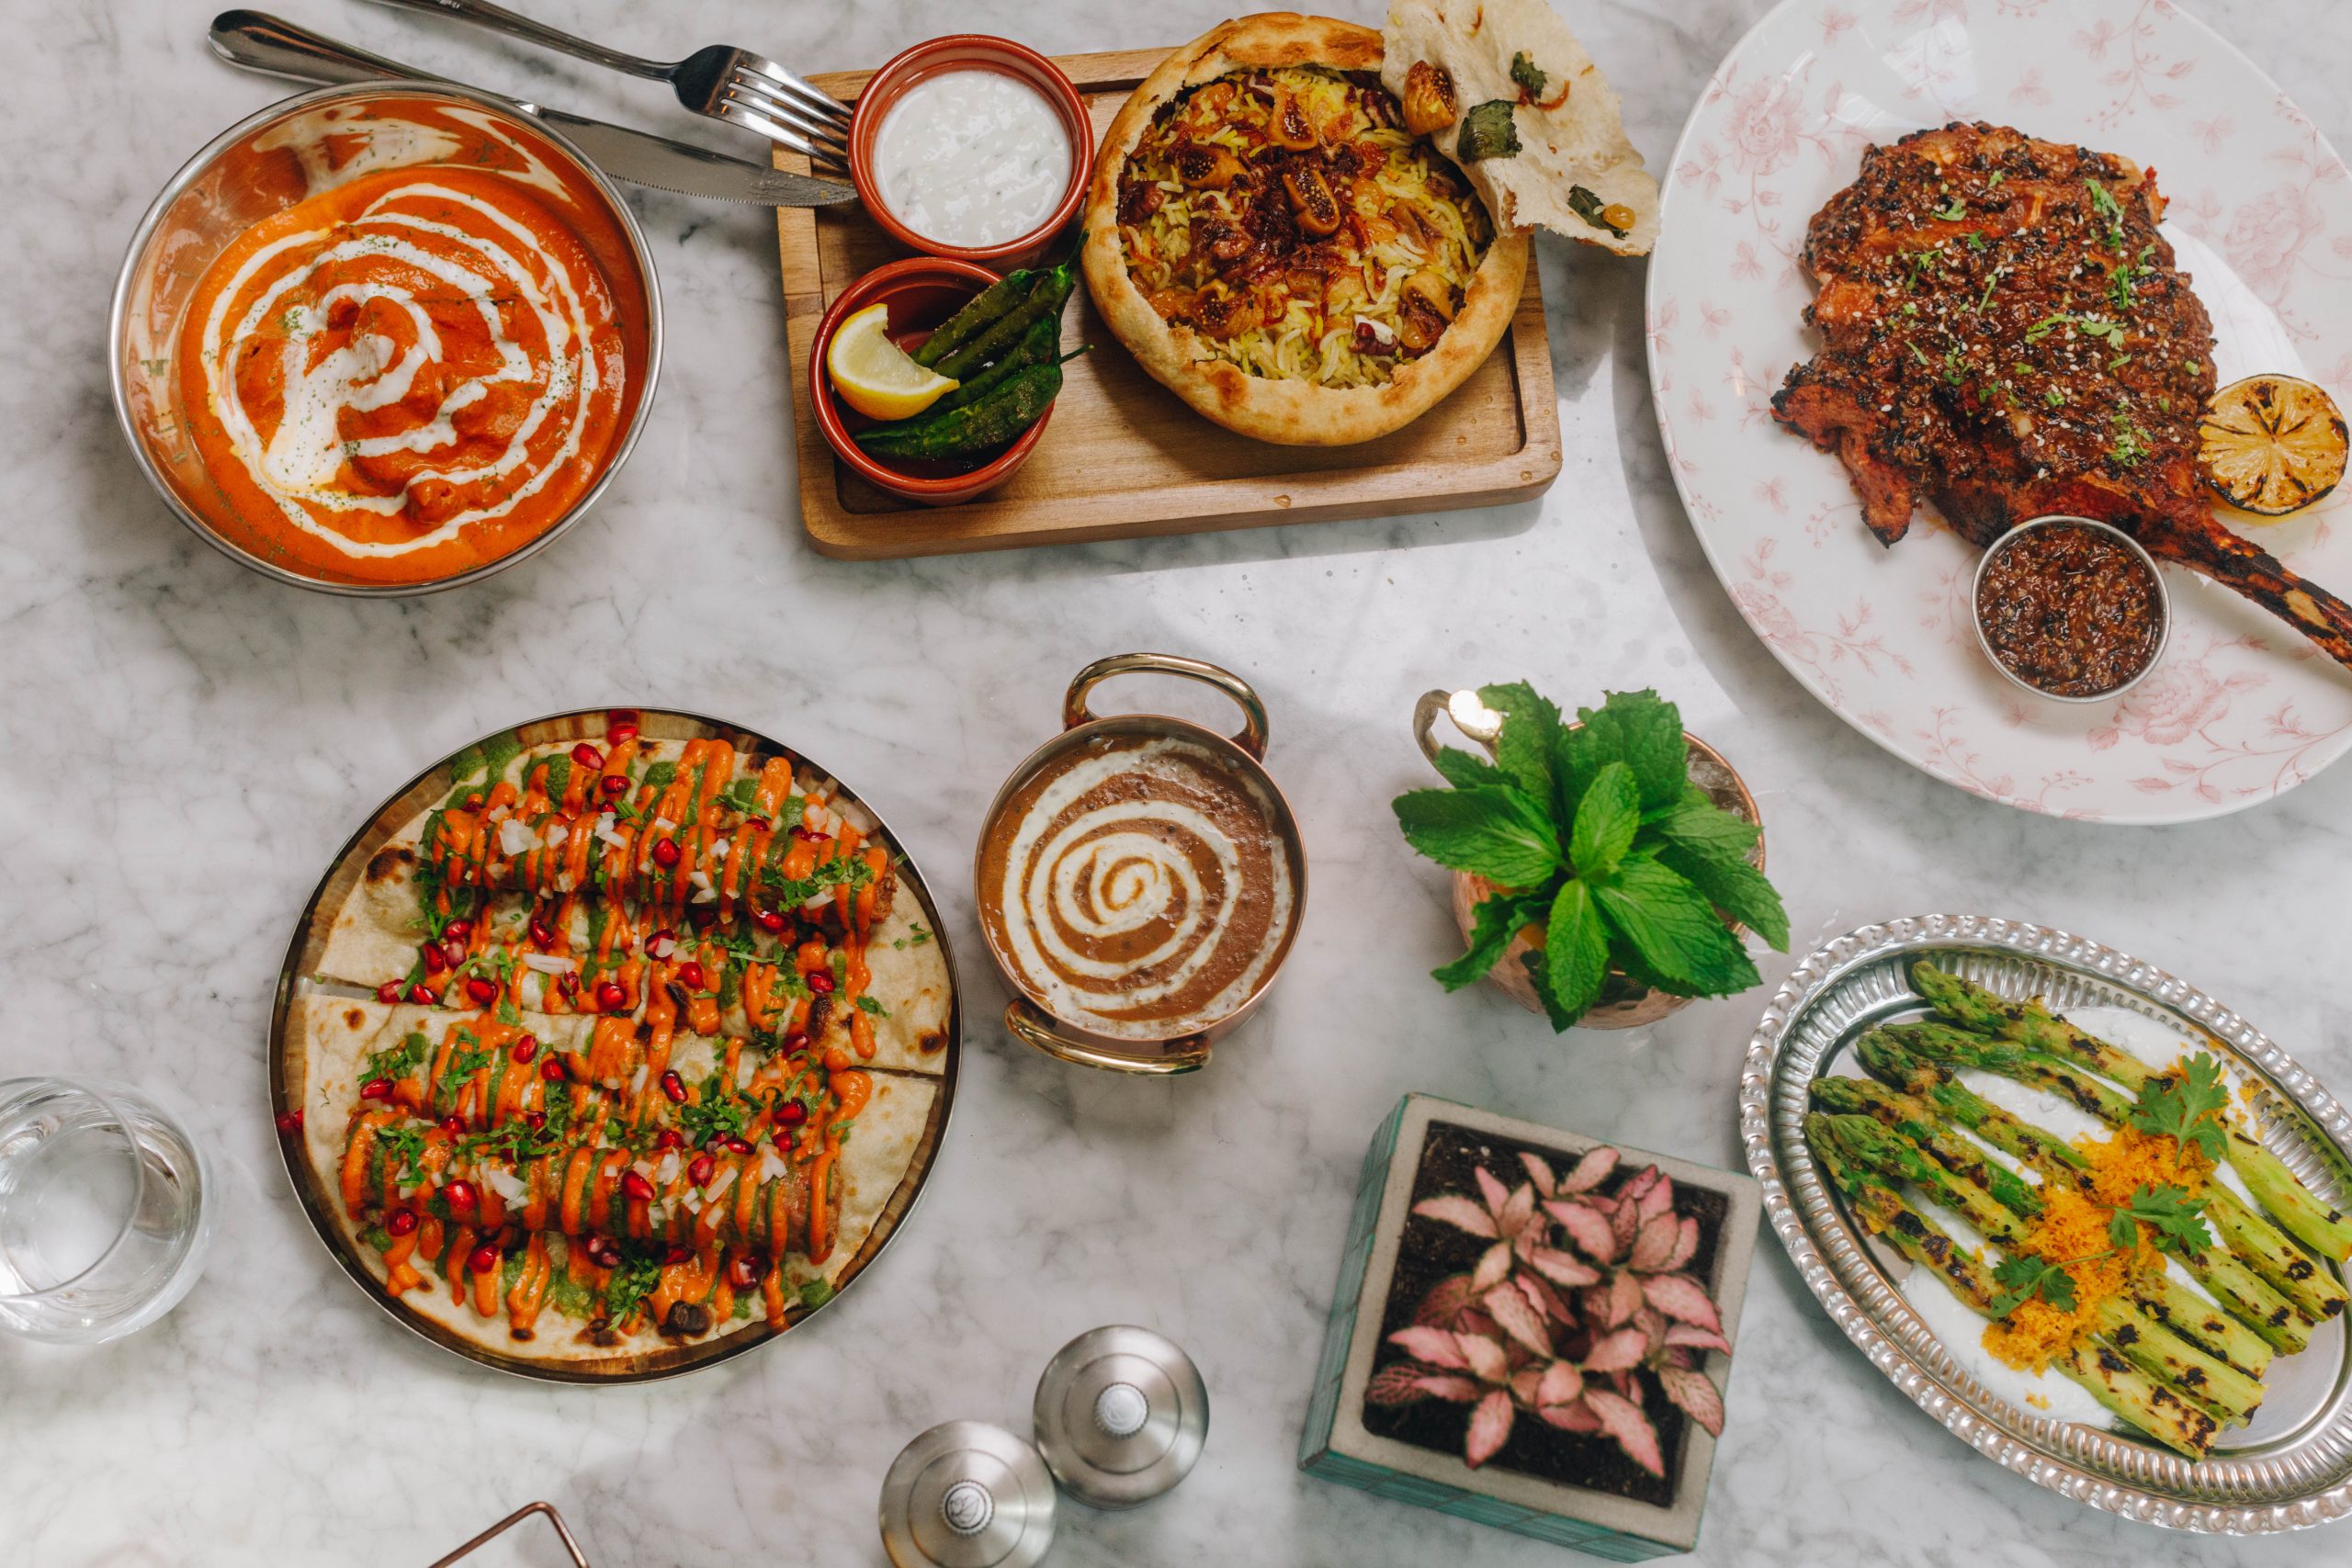 TANDOOR TINA PAYS HOMAGE TO TRADITION WITH A NEW DIRECTION